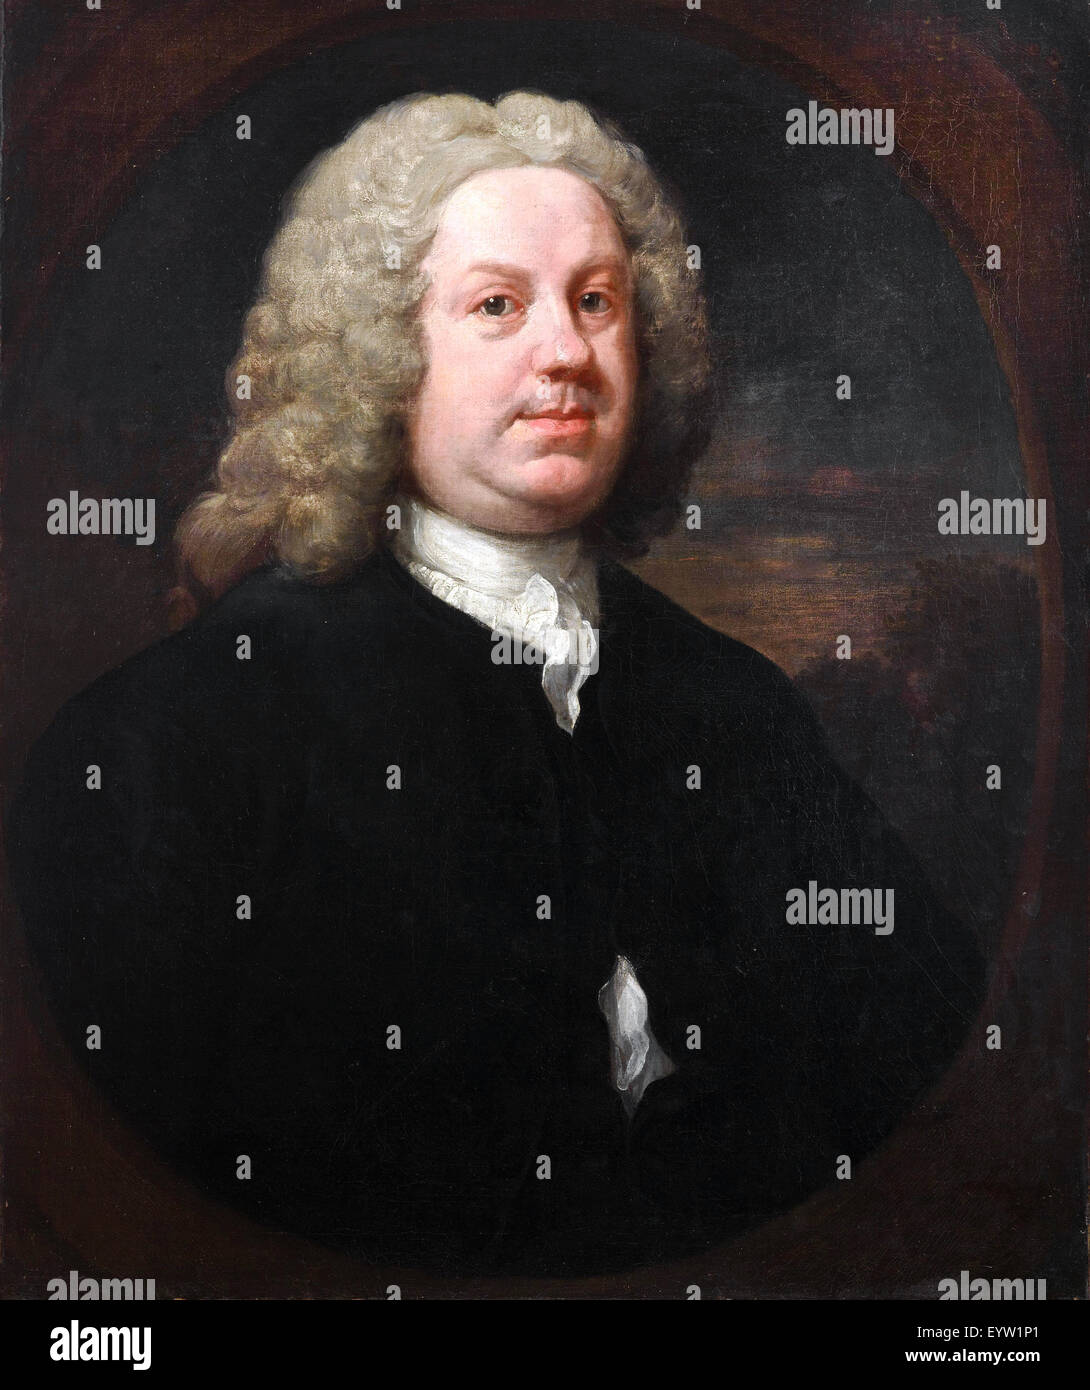 William Hogarth, Dr Benjamin Hoadly, MD. Early 1740s. Oil on canvas. Art Gallery of New South Wales, Australia. Stock Photo